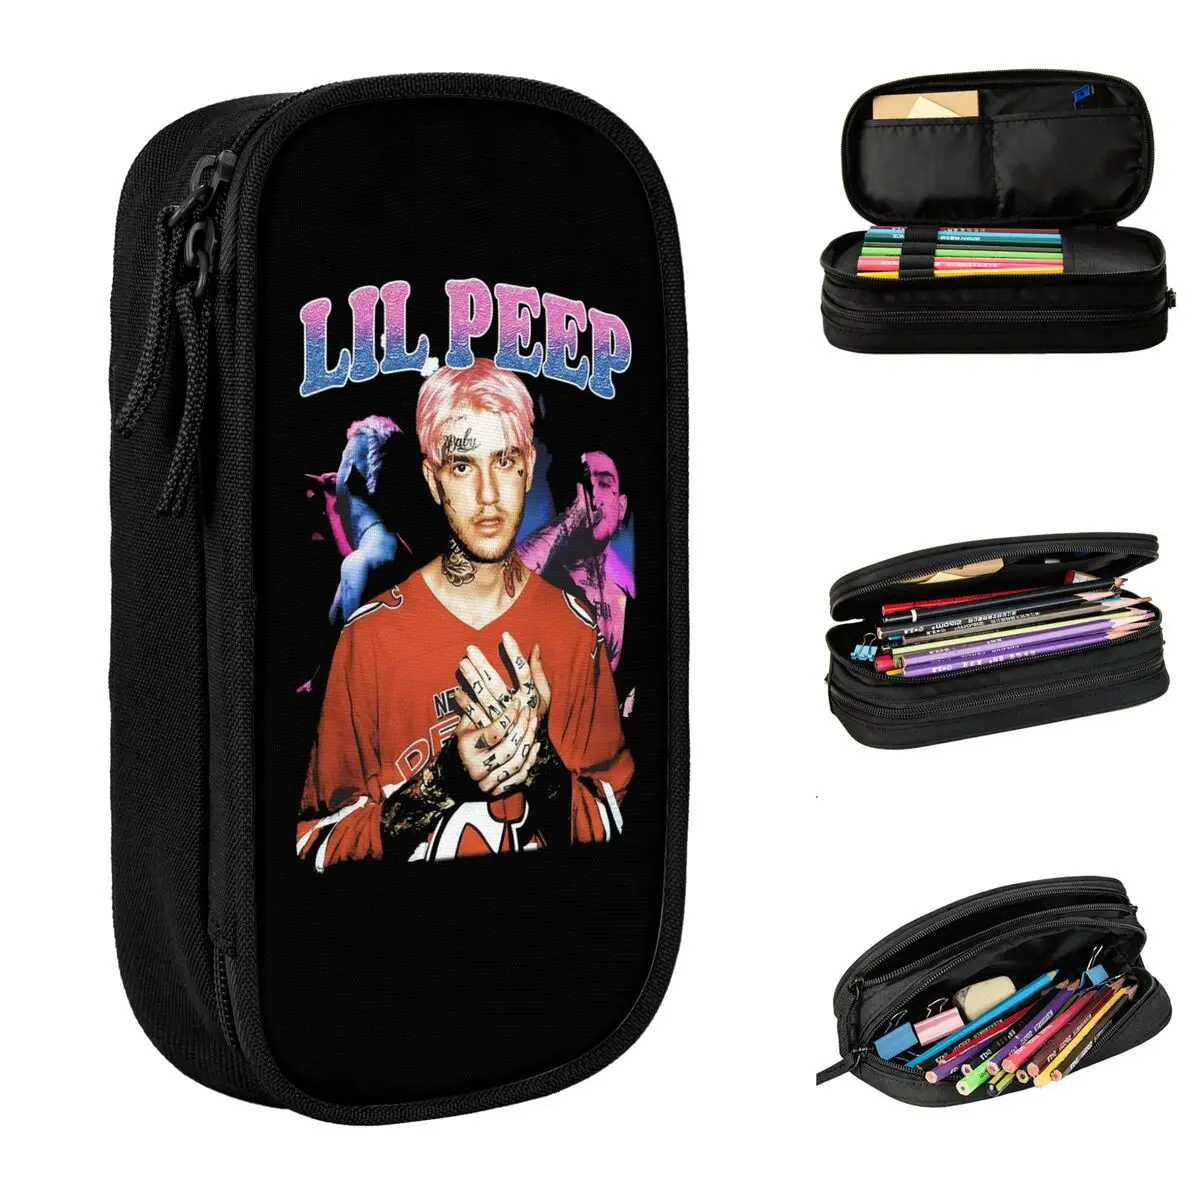 

Lil Peep 90s Rapper Pencil Case Pencilcases Pen Kids Large Storage Bag Students School Gifts Stationery